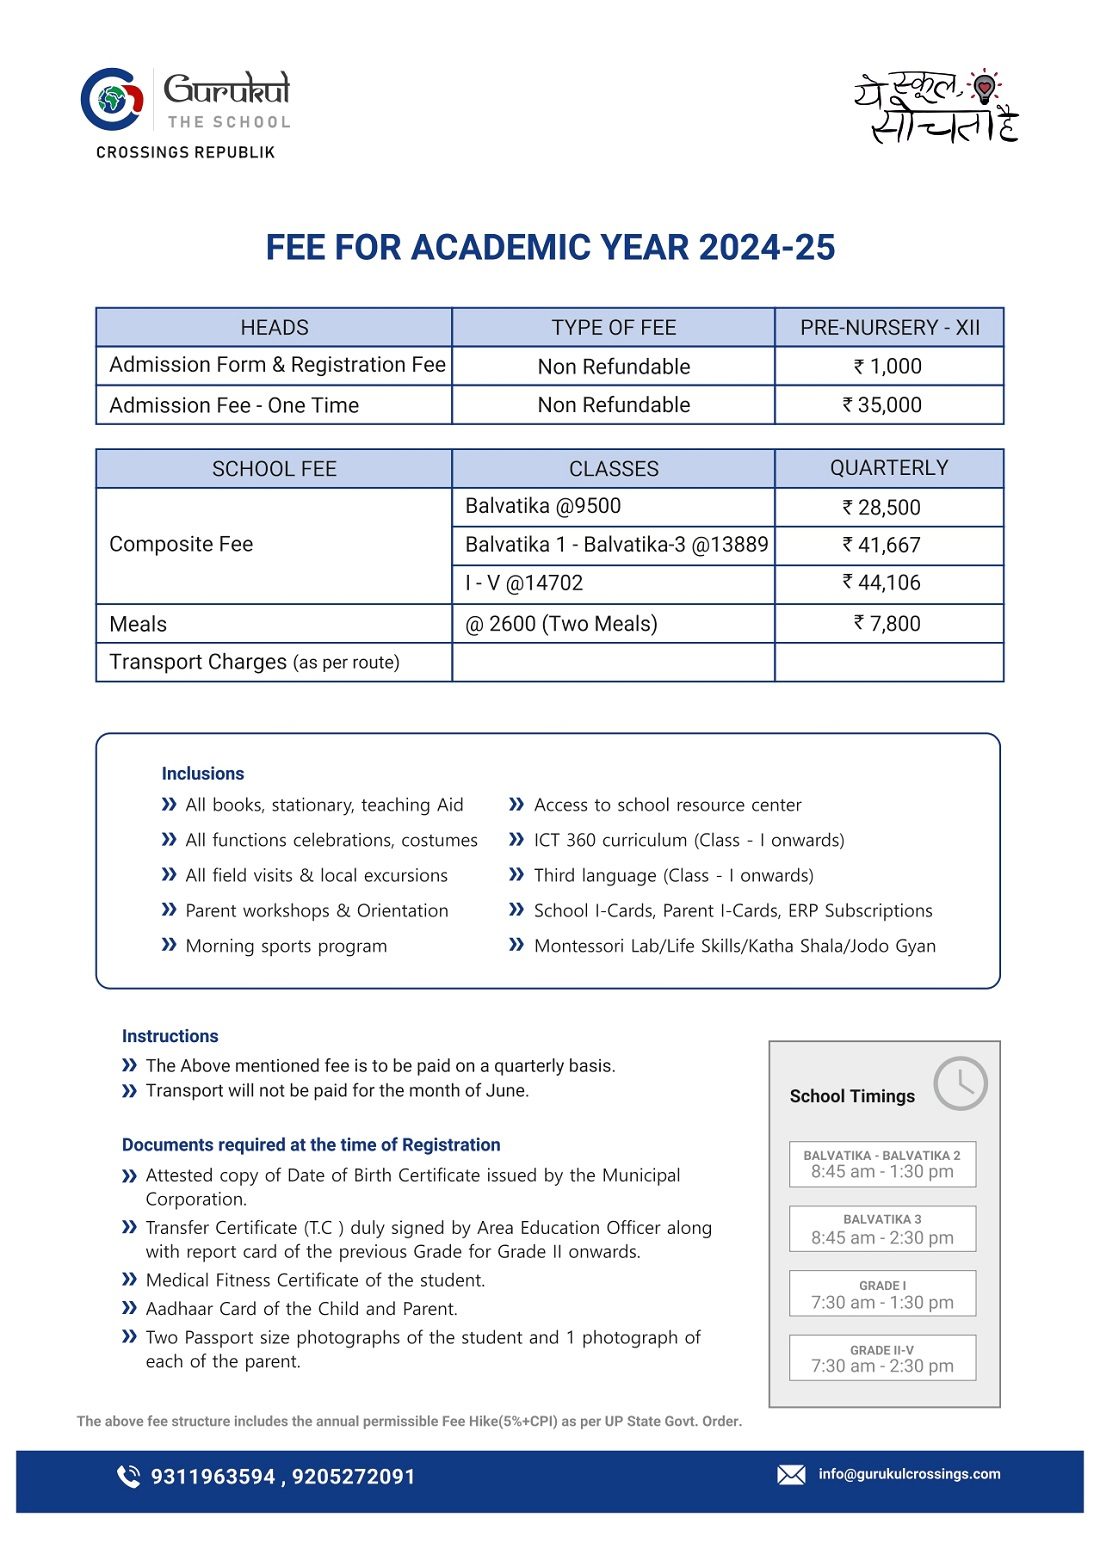 CR Fee Structure 15.4.24_page-0001